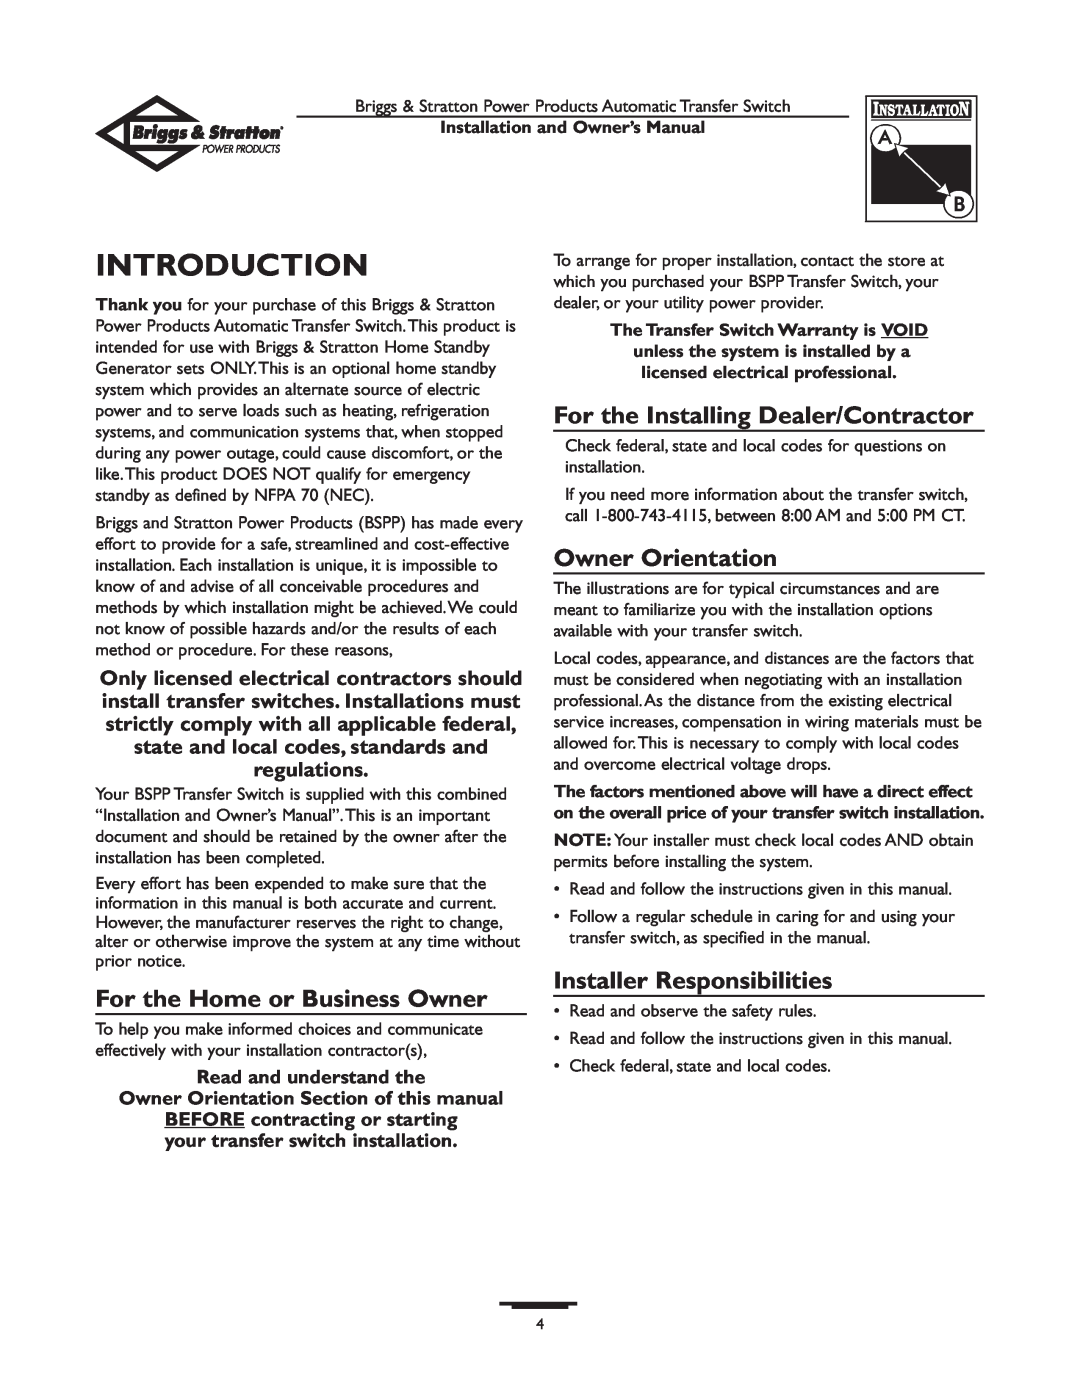 Briggs & Stratton 01814-0, 01813-0 owner manual Introduction, For the Installing Dealer/Contractor, Owner Orientation 